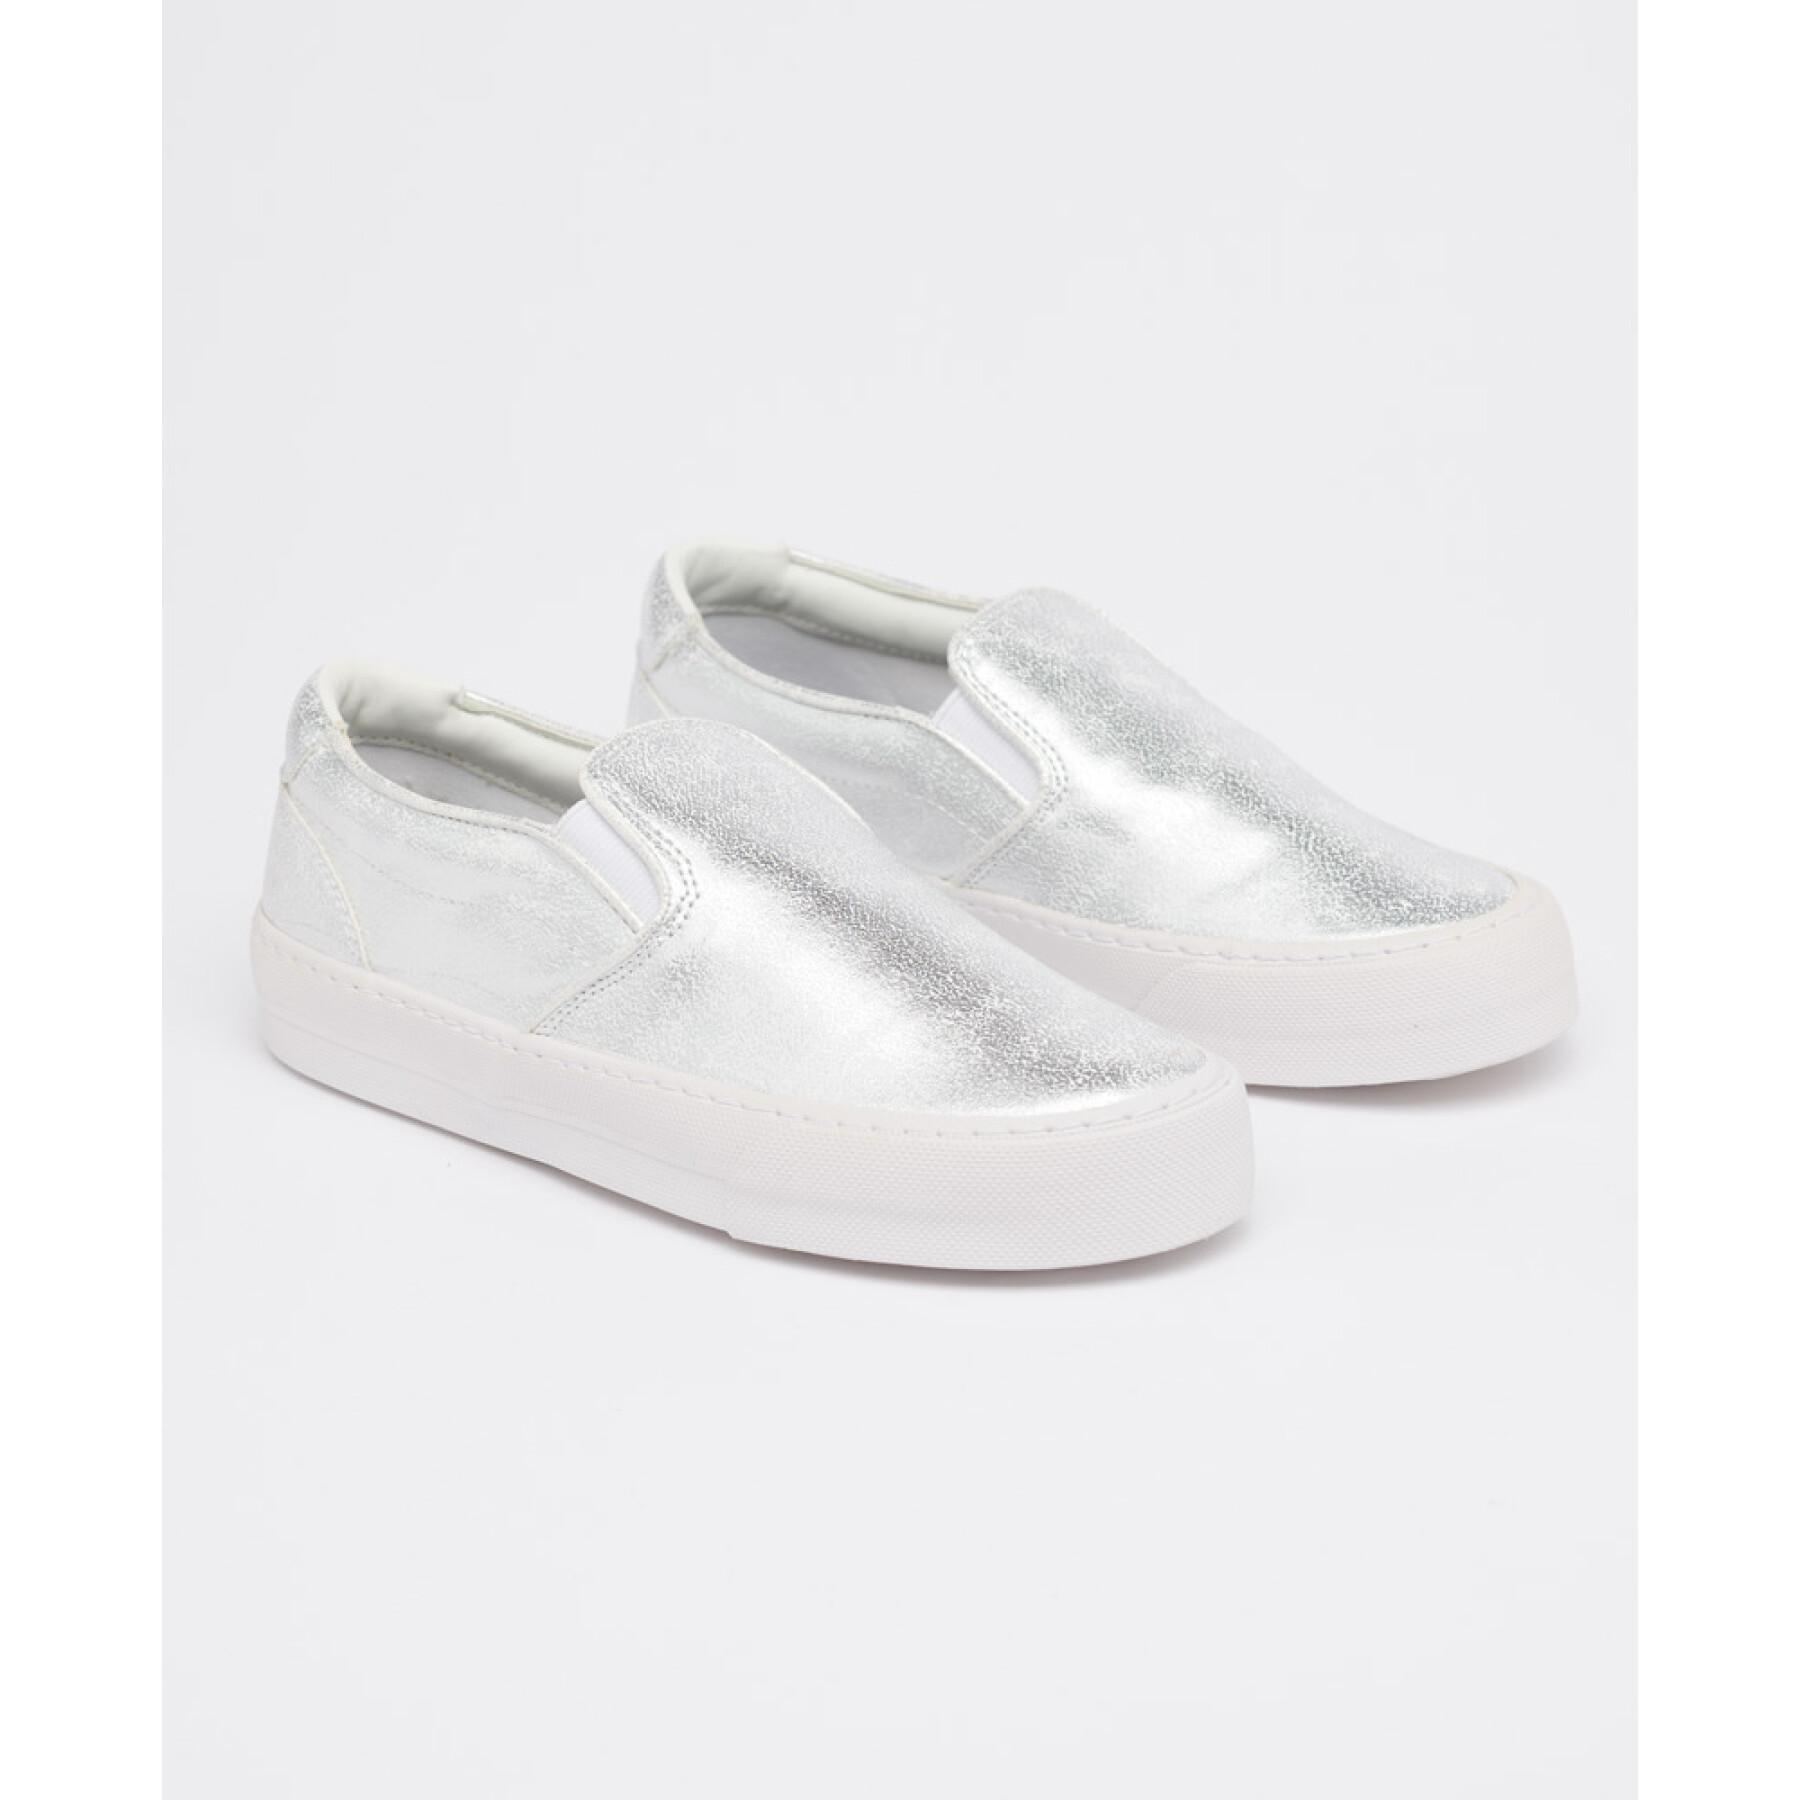 Women's slip-on sneakers Superdry Classic